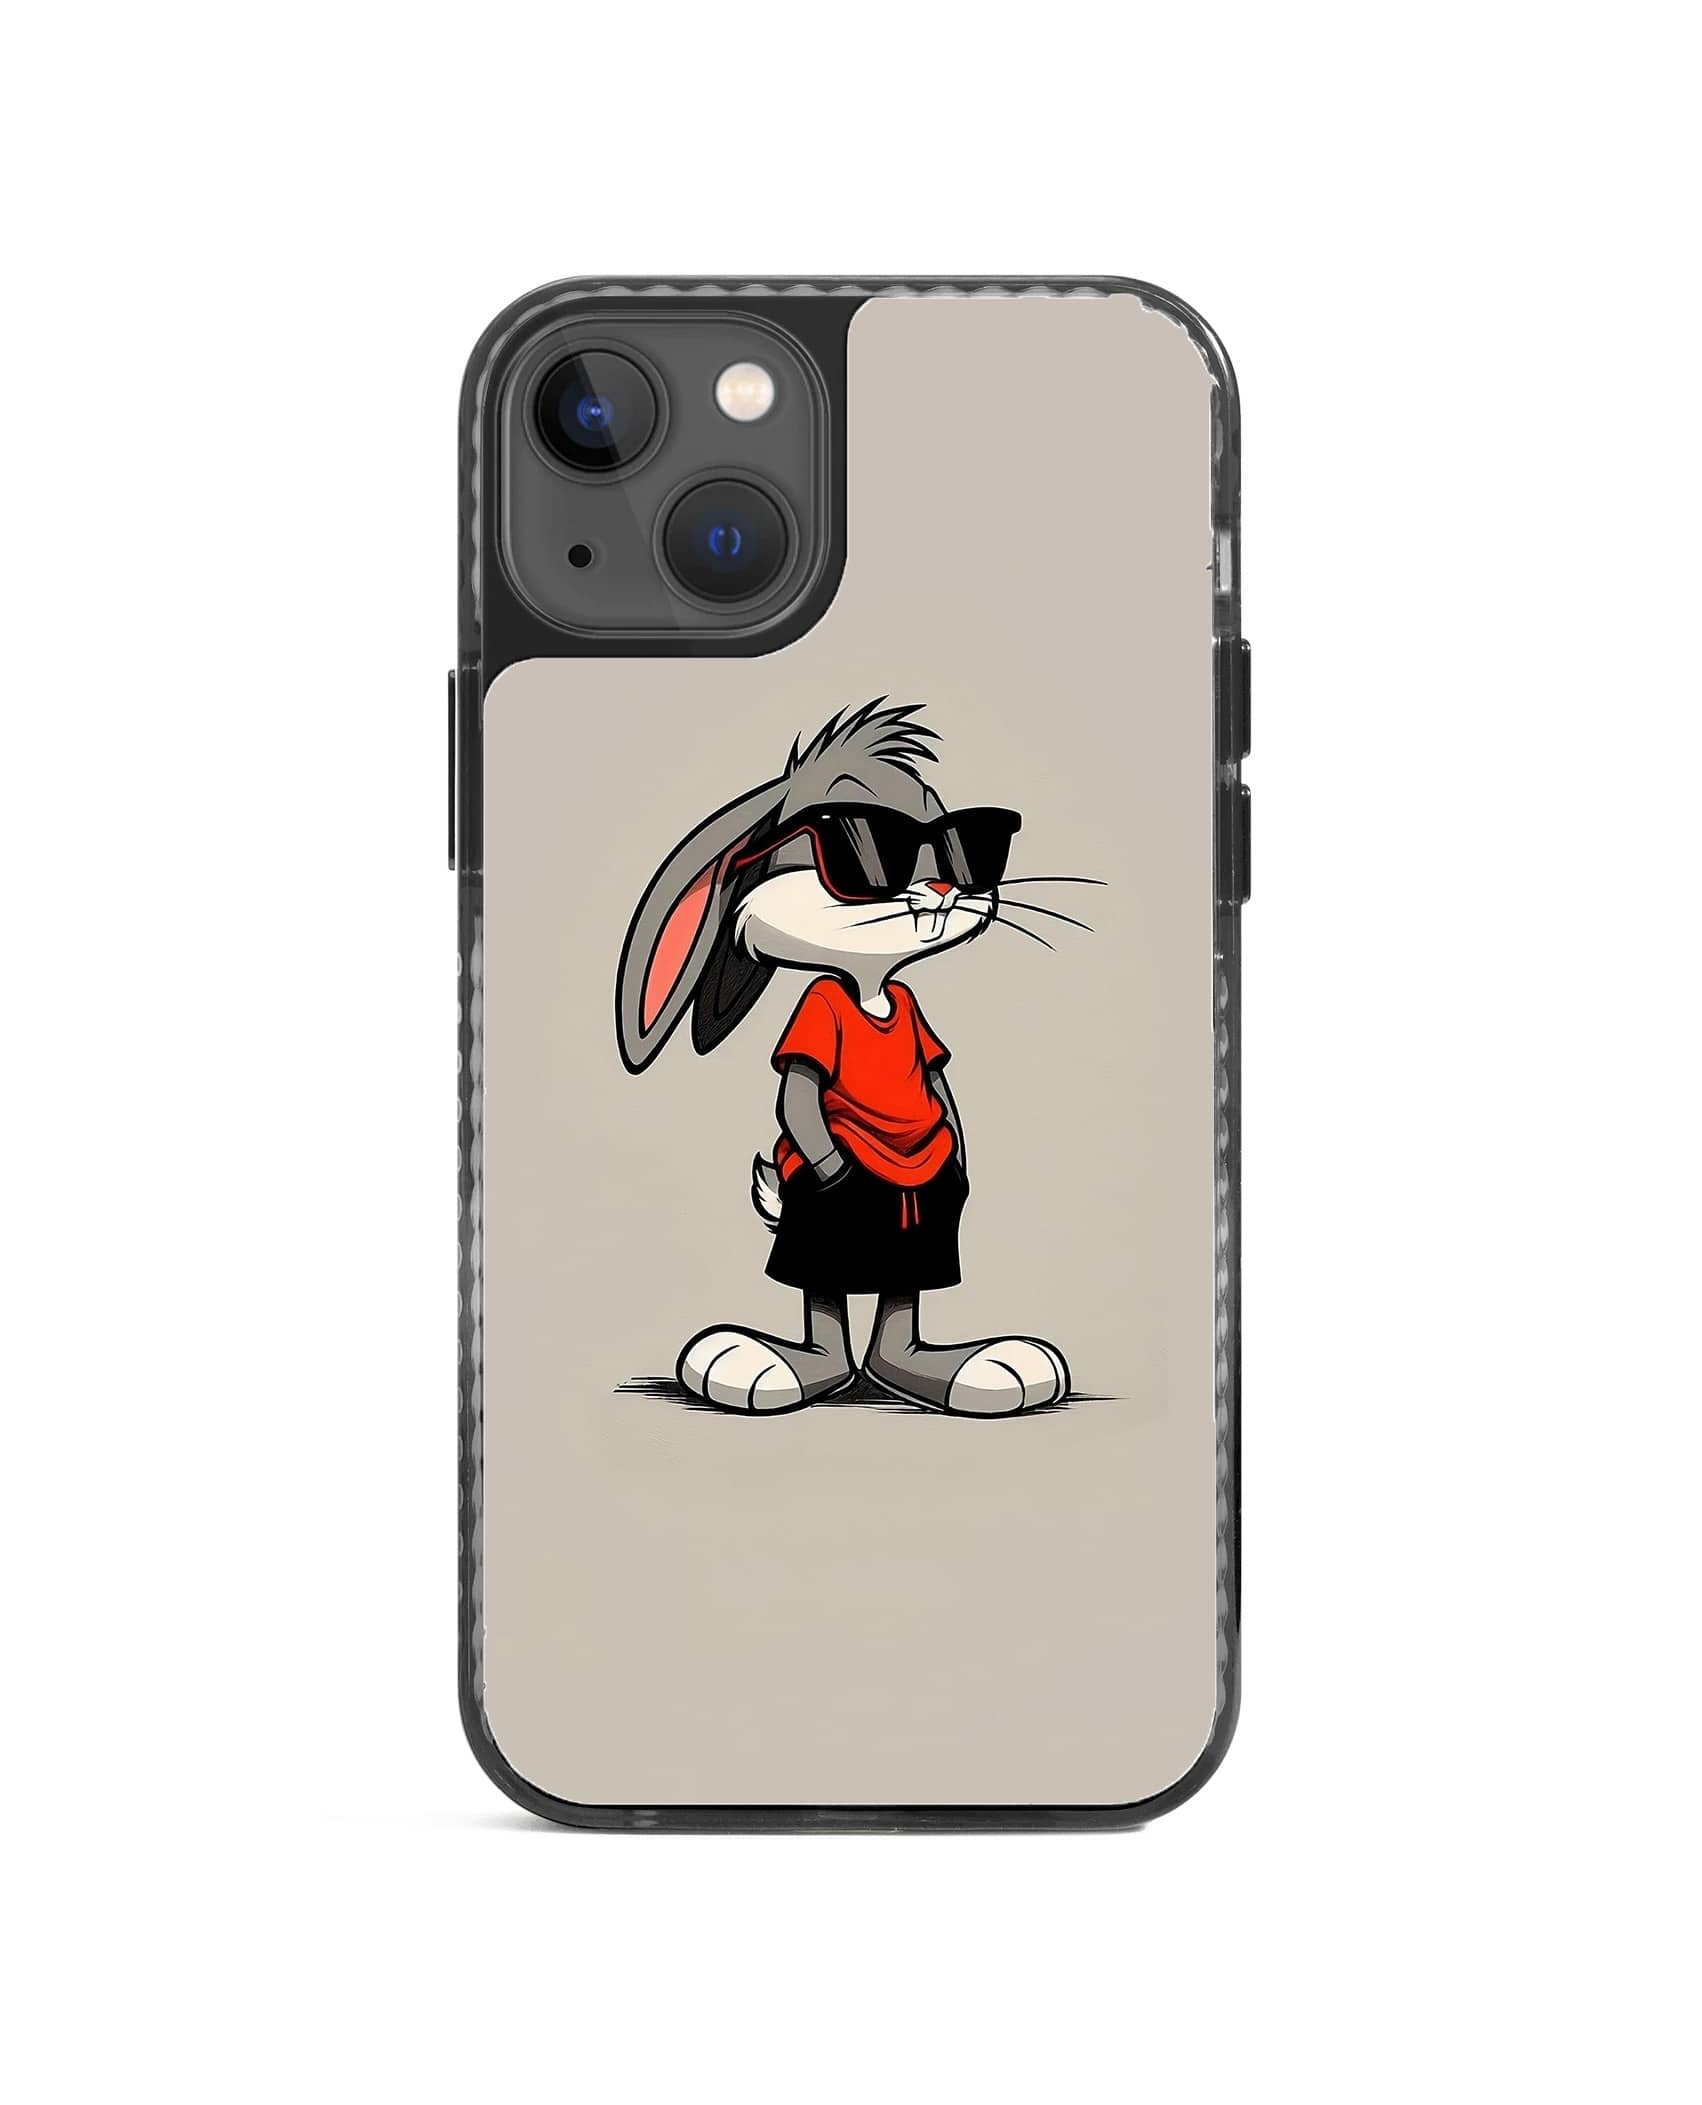 Cool Bunny Stride 2.0 Case